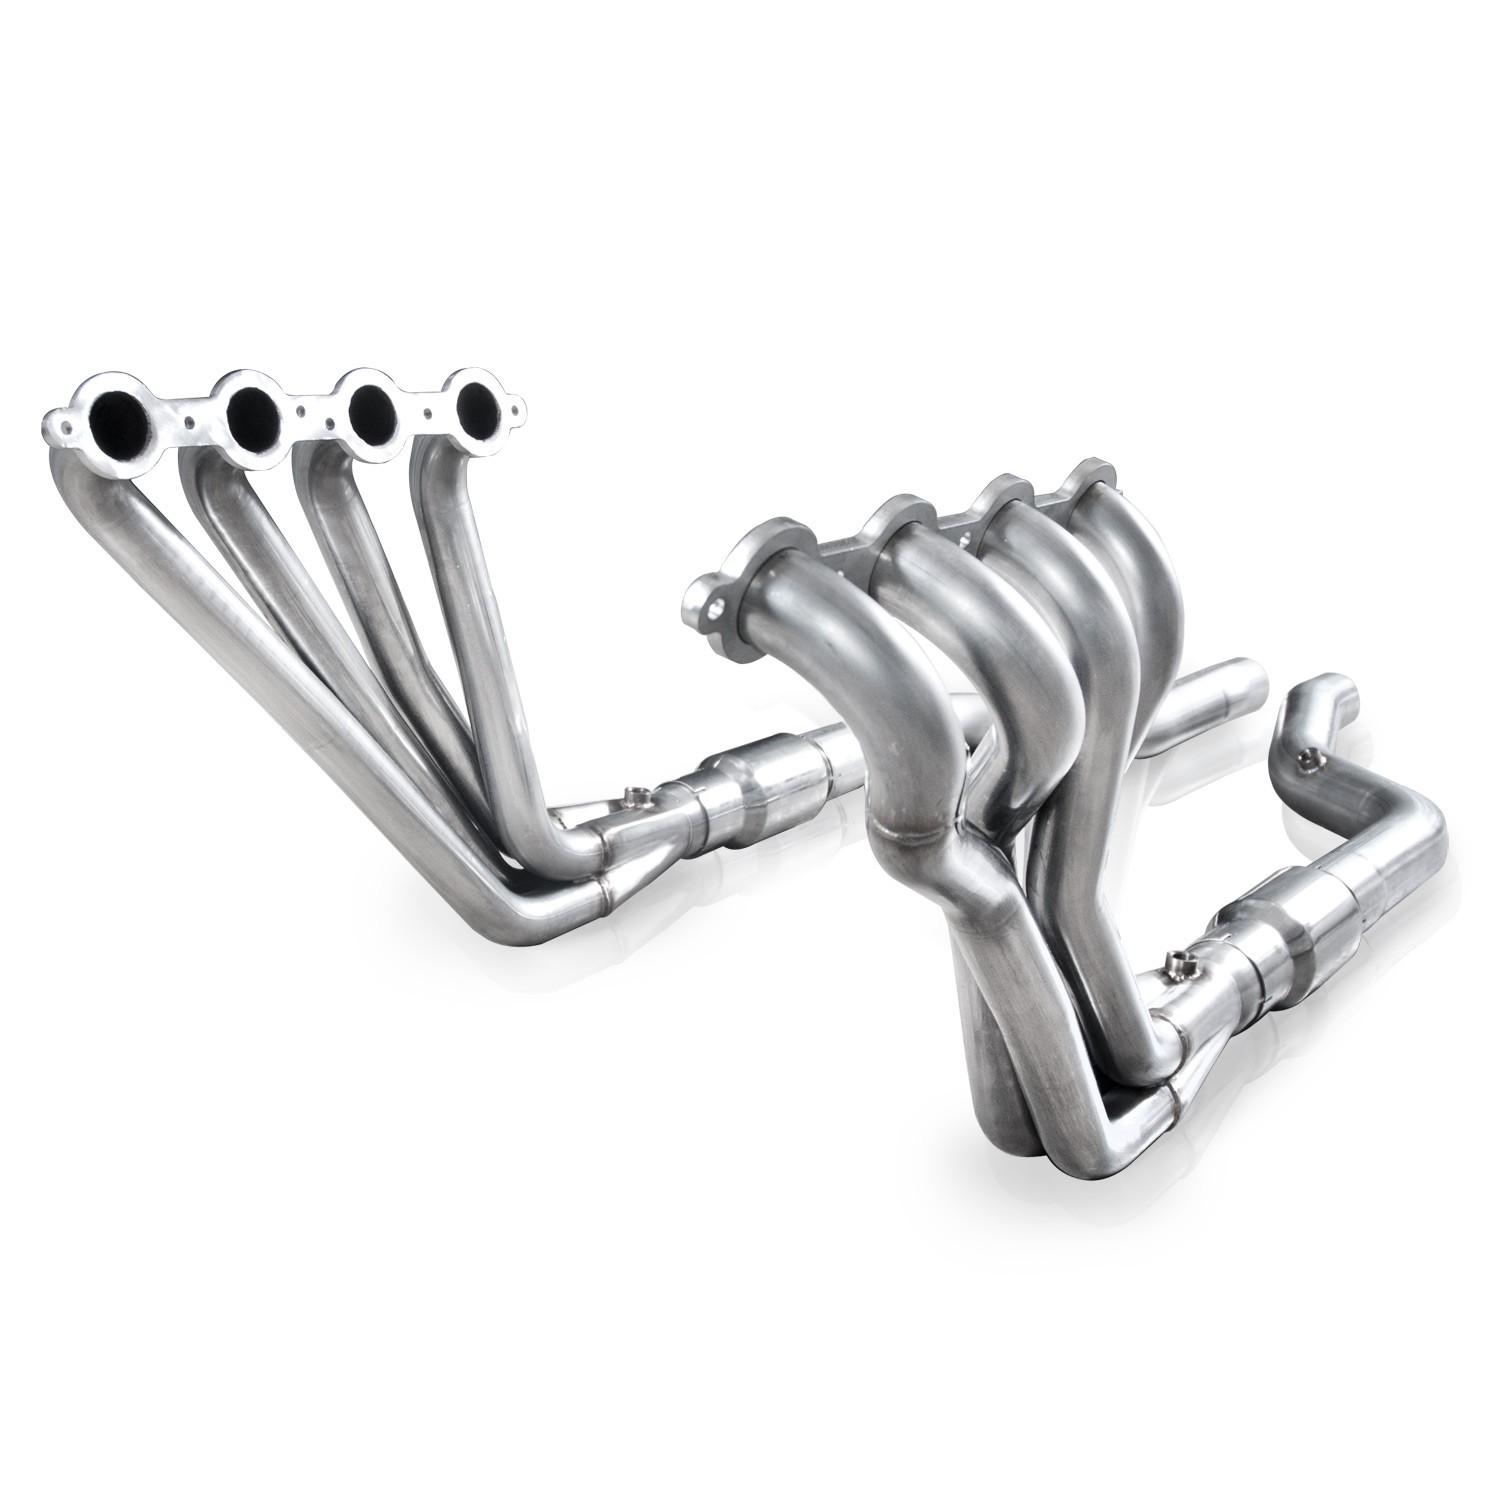 2010-2015 Camaro V8 Stainless Works 1 7/8" Long Tube Headers w/3" Catted Connection Pipes - For SW Exhaust Performance Connectio